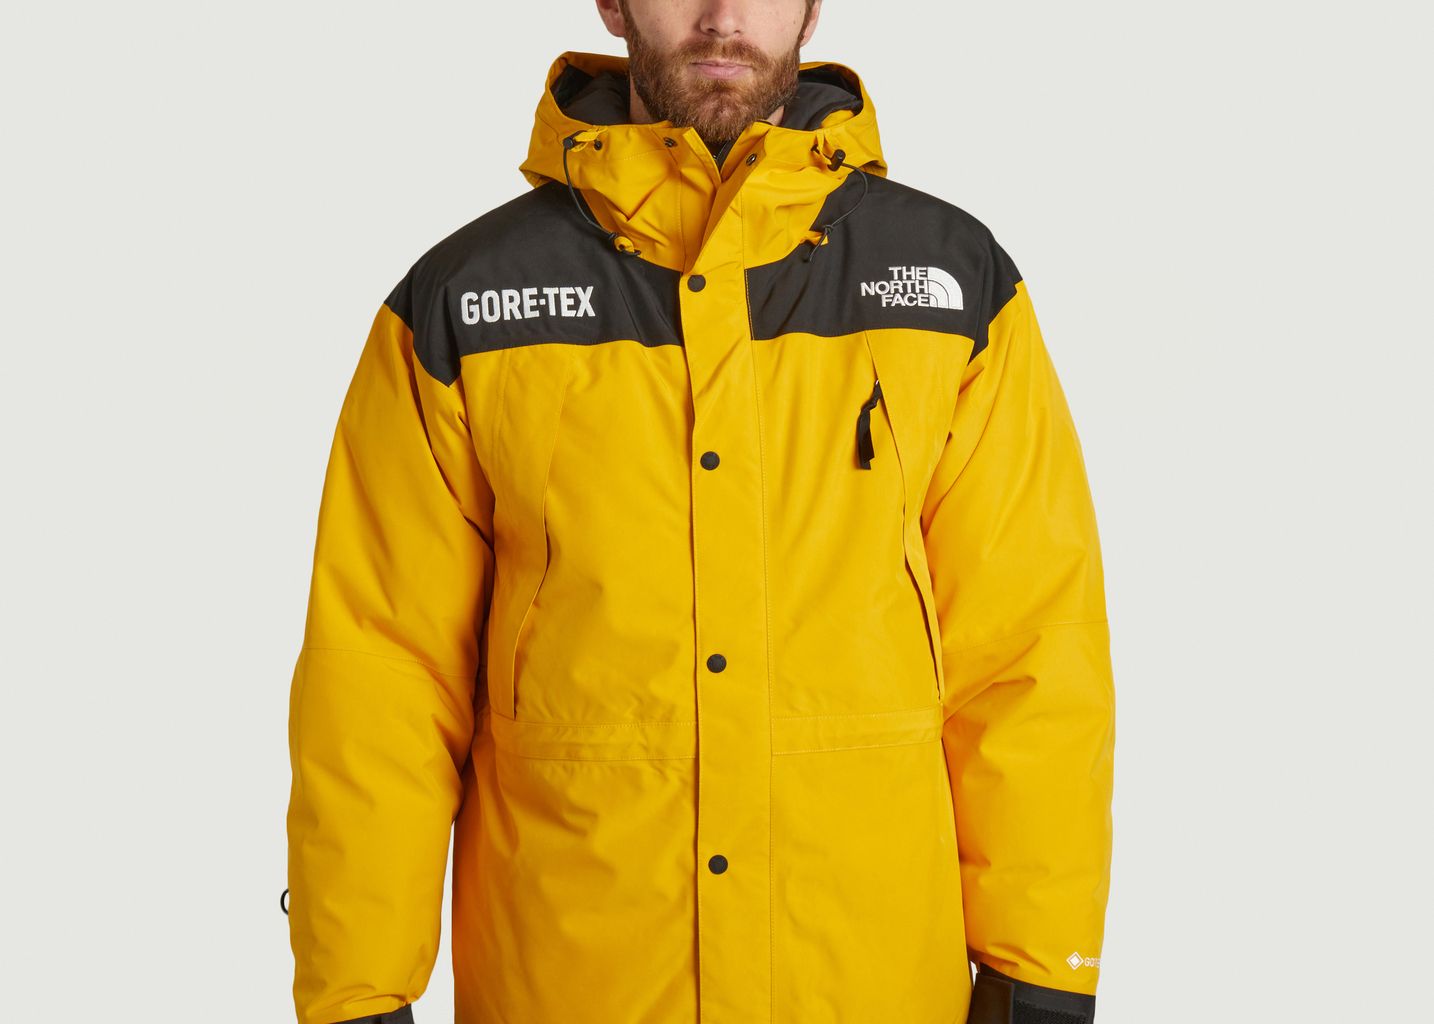 NORTH FACE GORE-TEX NP10990 (Lsize) - マウンテンパーカー